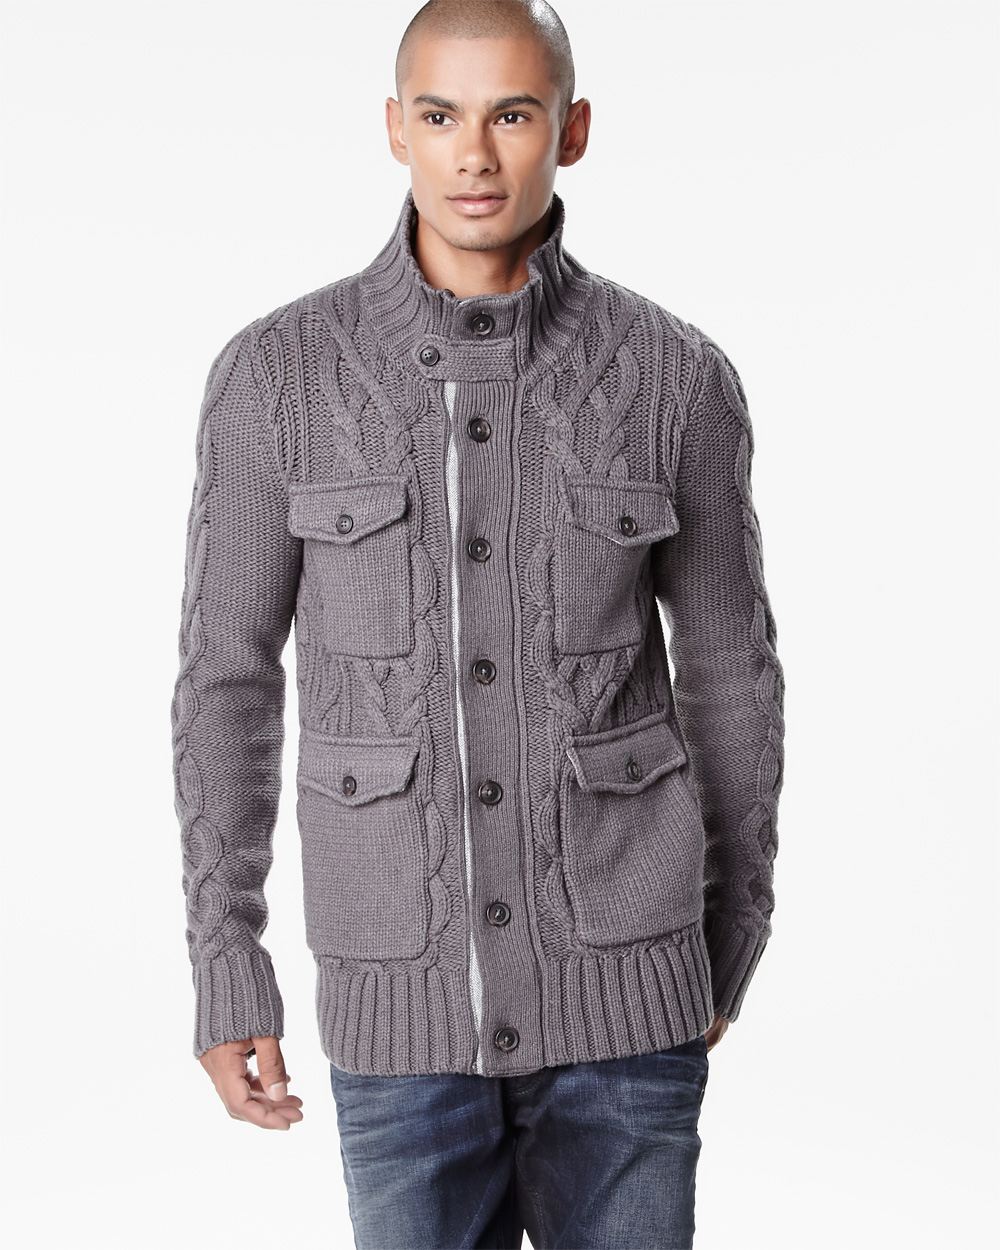 Utility sweater jacket with removable fur | RW&CO.